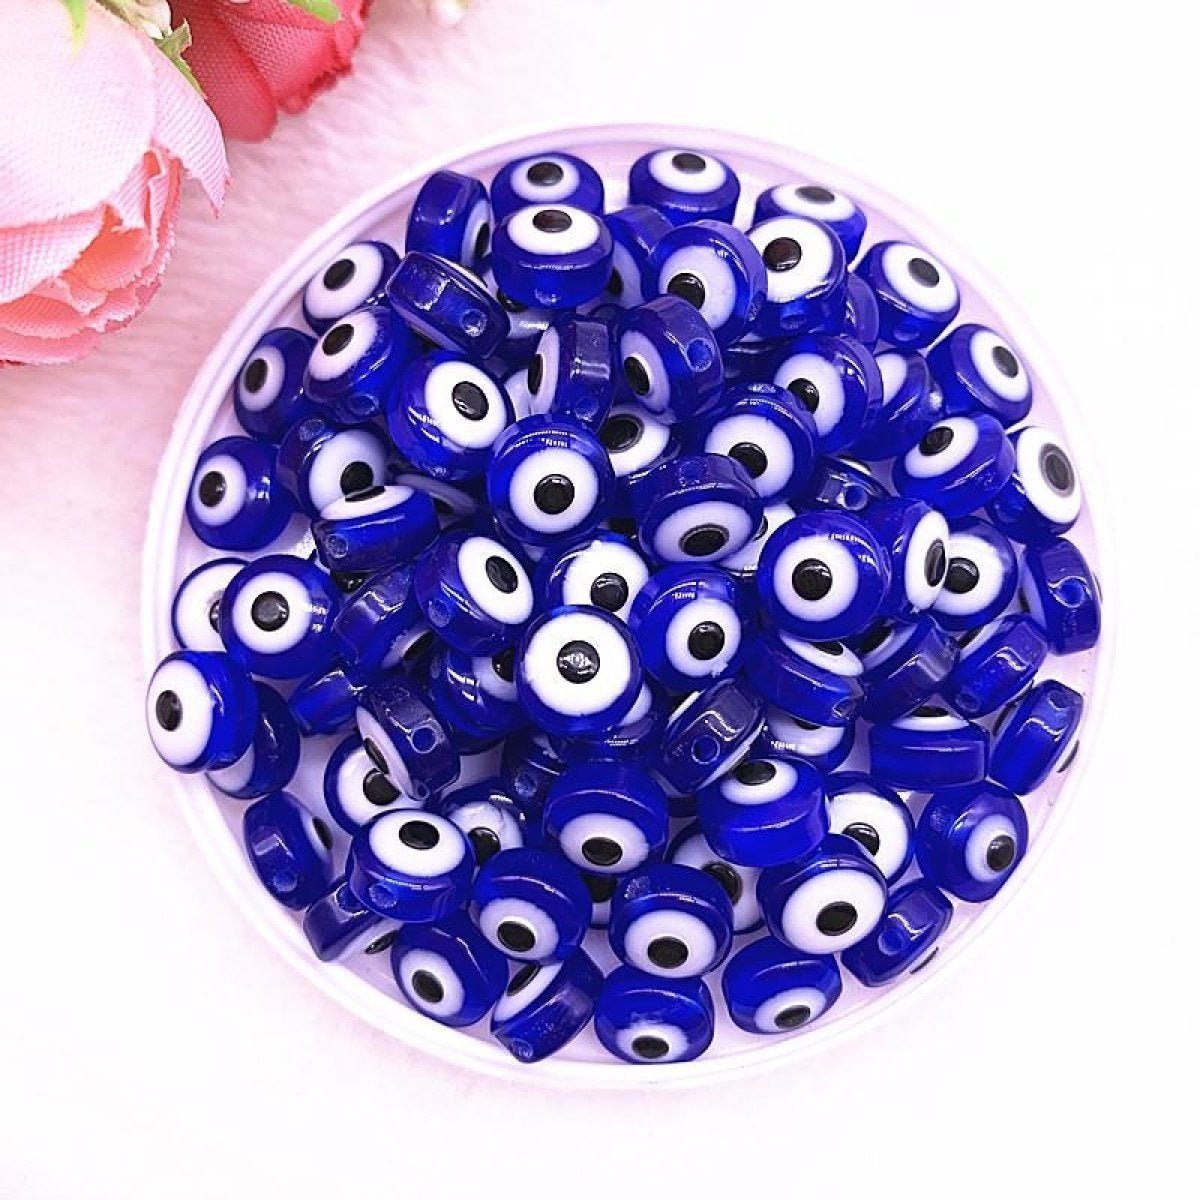 48pcs 8/10mm Resin Spacer Beads Double Sided Eyes for Jewelry Making DIY Bracelet Beads Flat Backing - Deep Blue 8mm - - Asia Sell